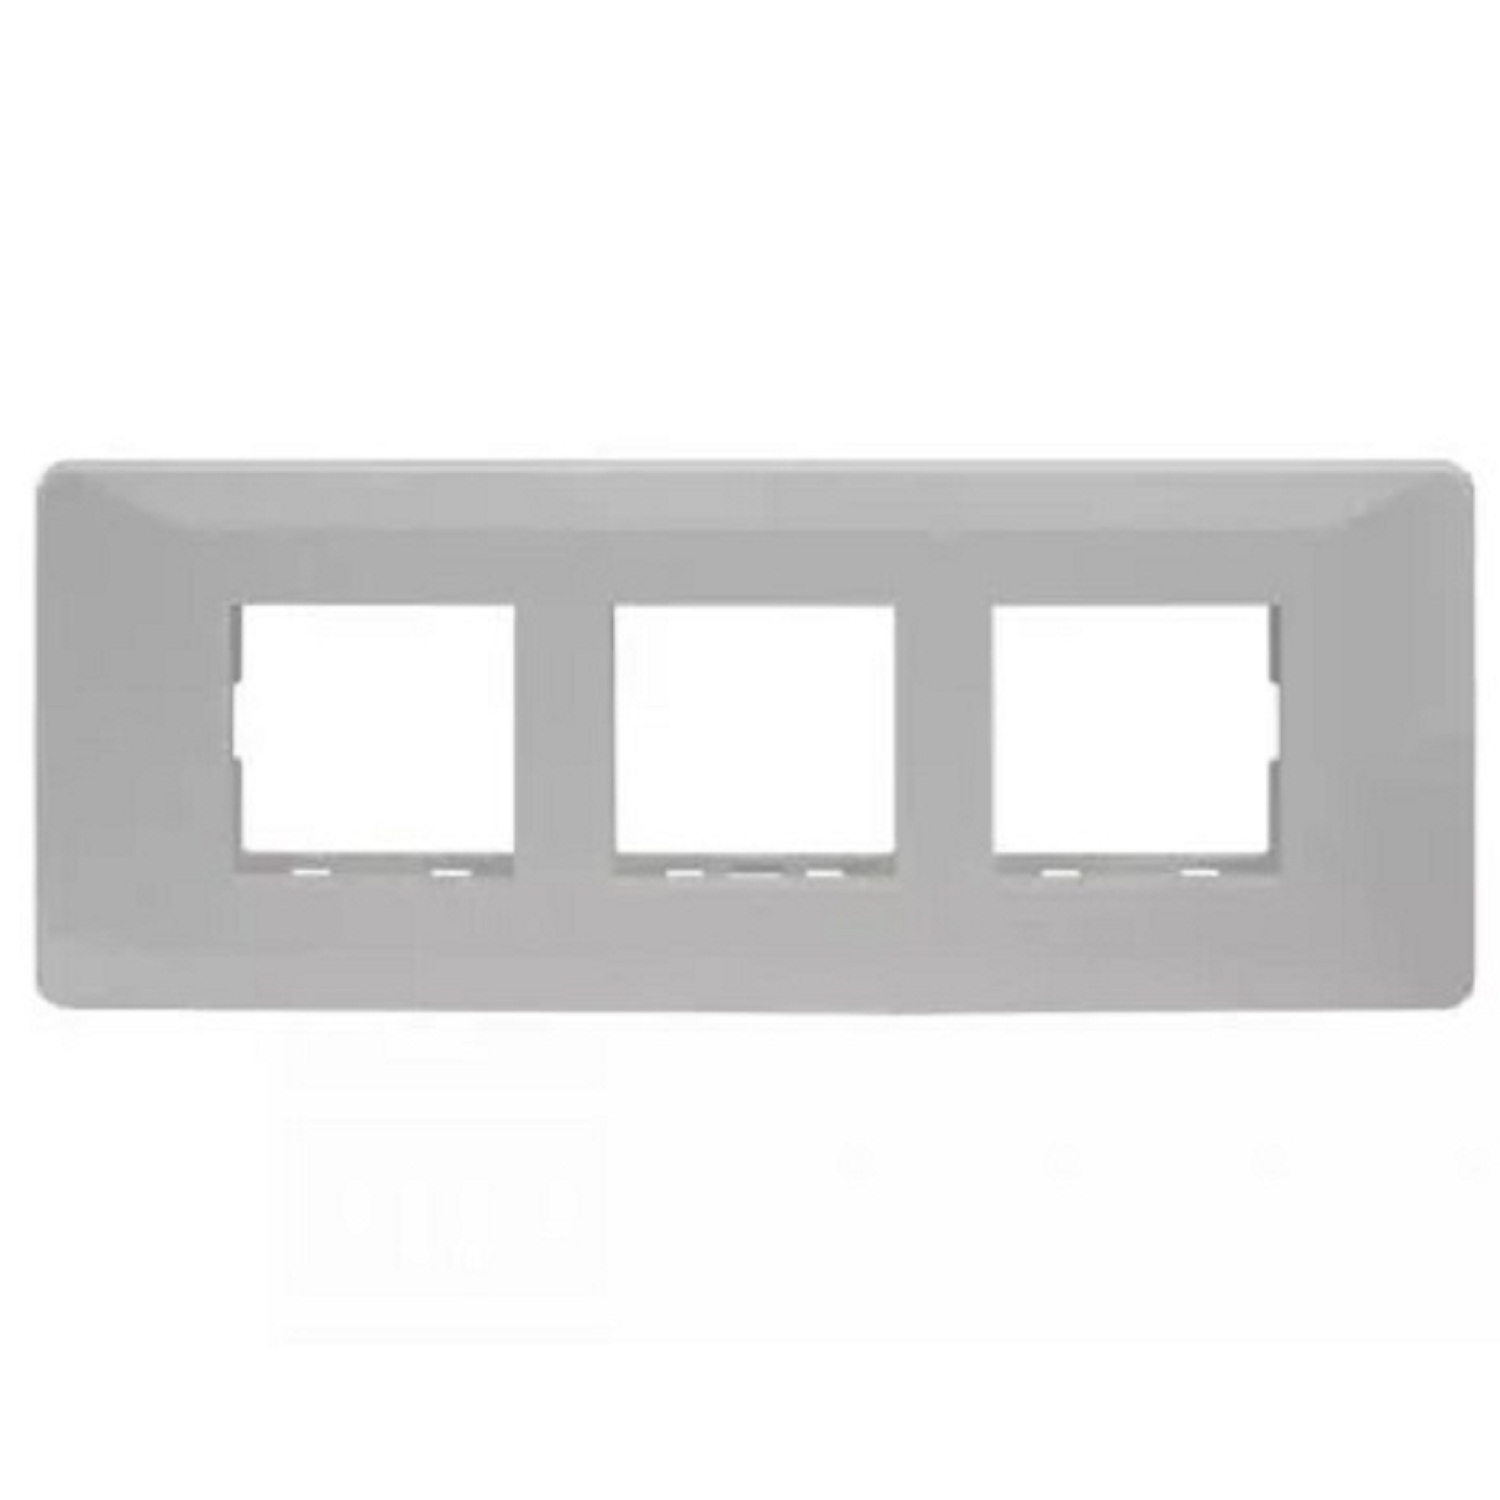 LT Entice 6 Module (Regular) Cover Plate with Base Frame - White